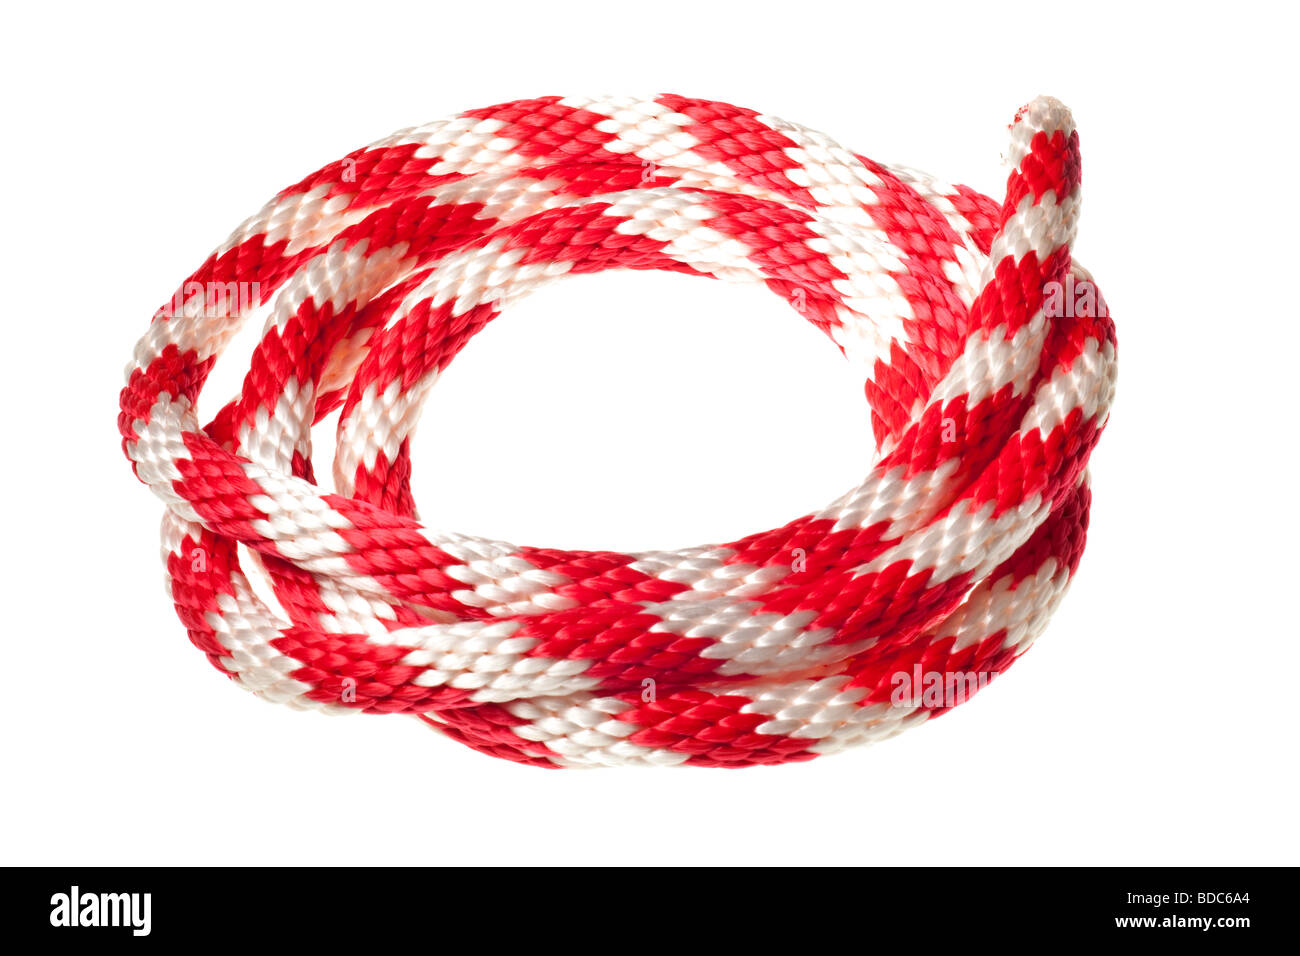 red and white nylon rope isolated on a pure white background Stock Photo